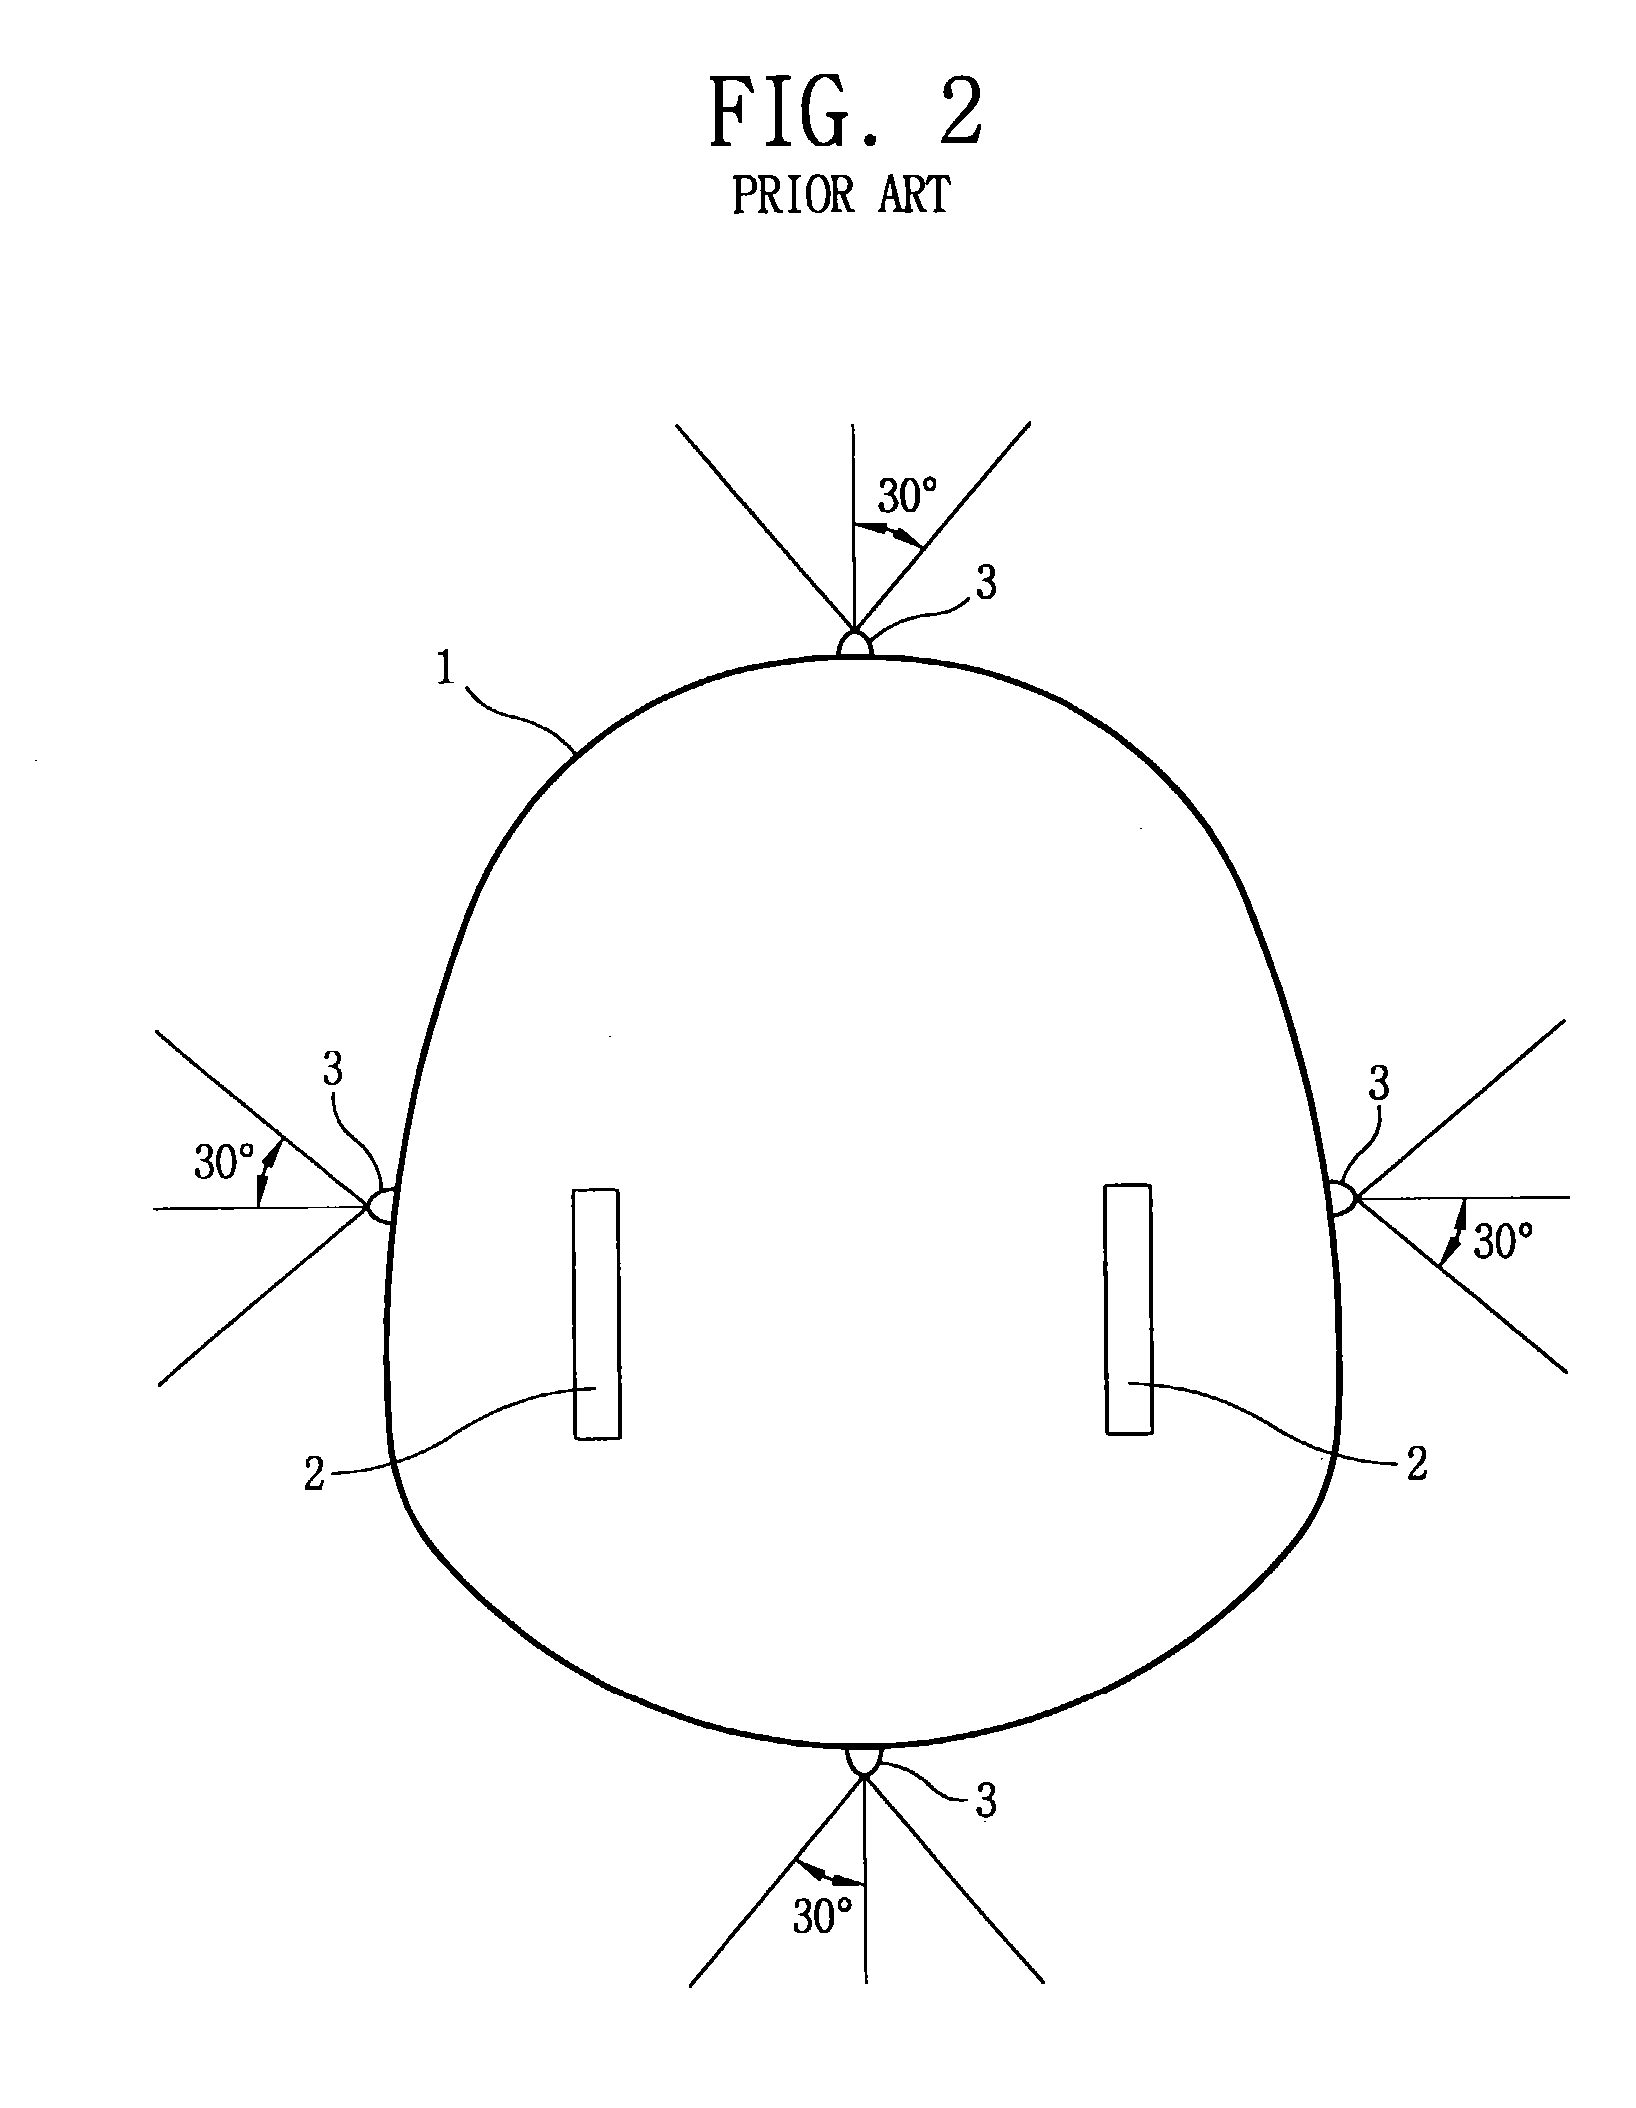 Position information recognition apparatus for cleaning robot